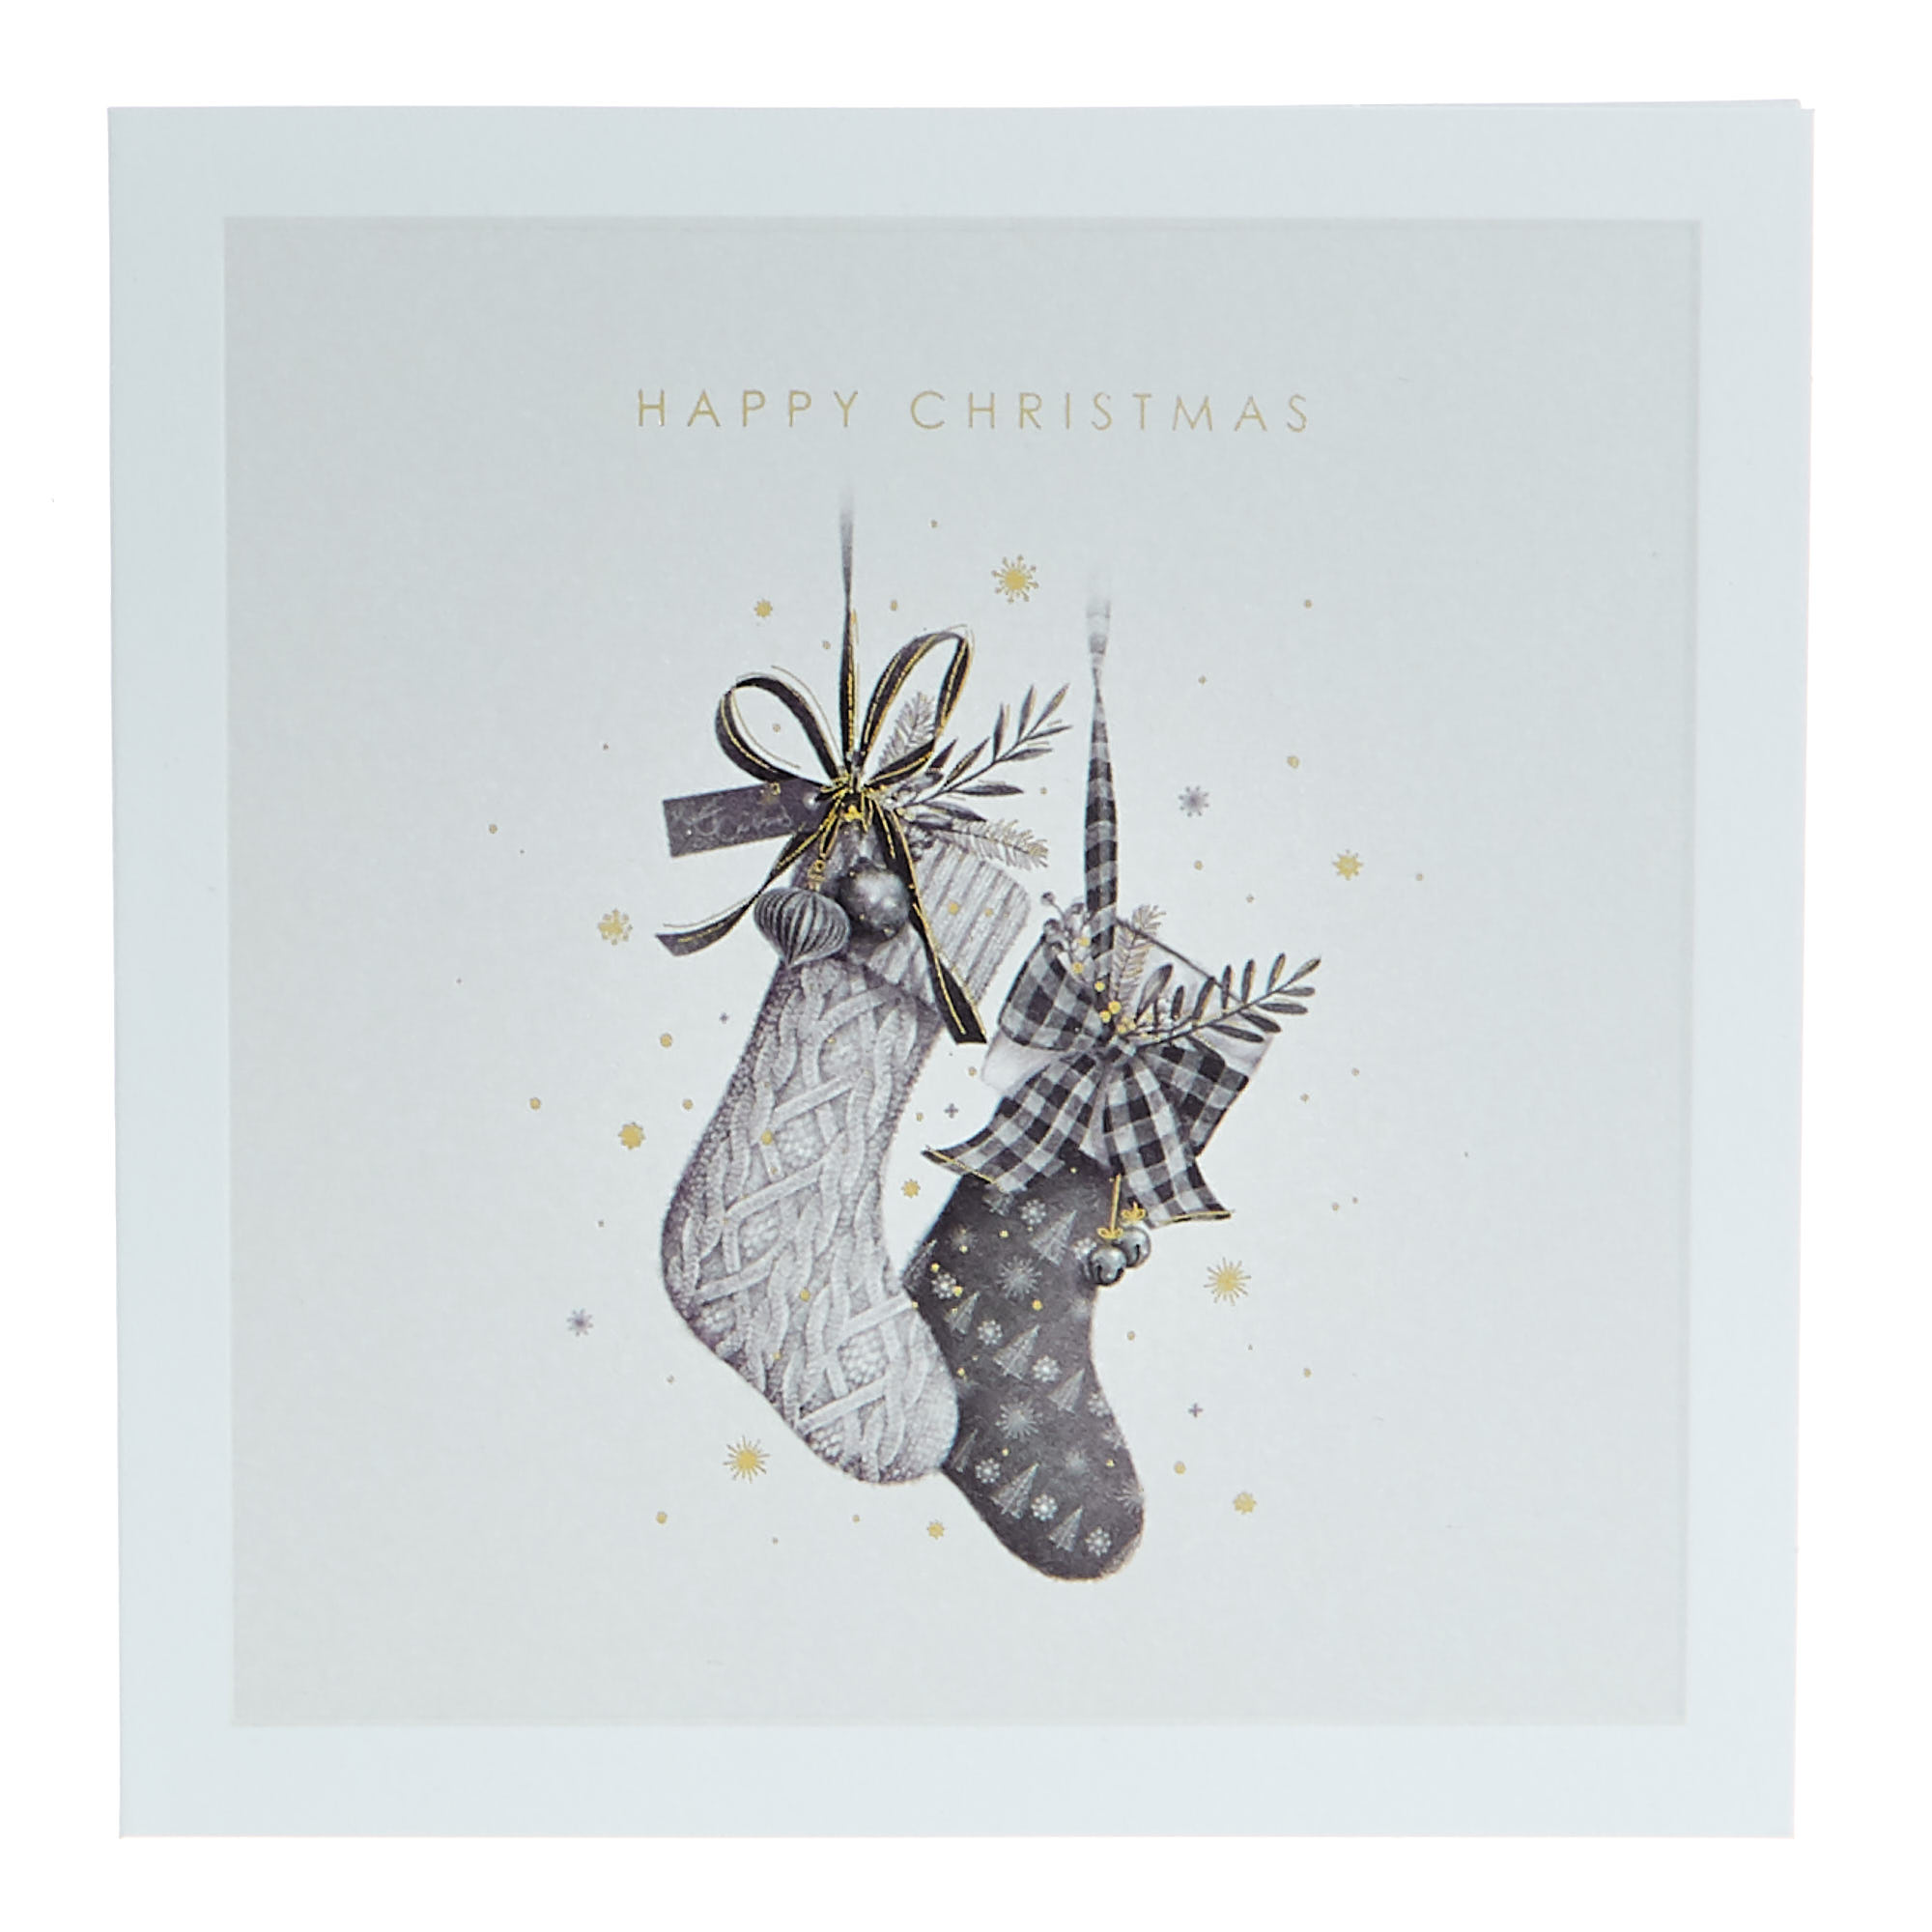 16 Charity Christmas Cards - Contemporary Sketches (4 Designs)